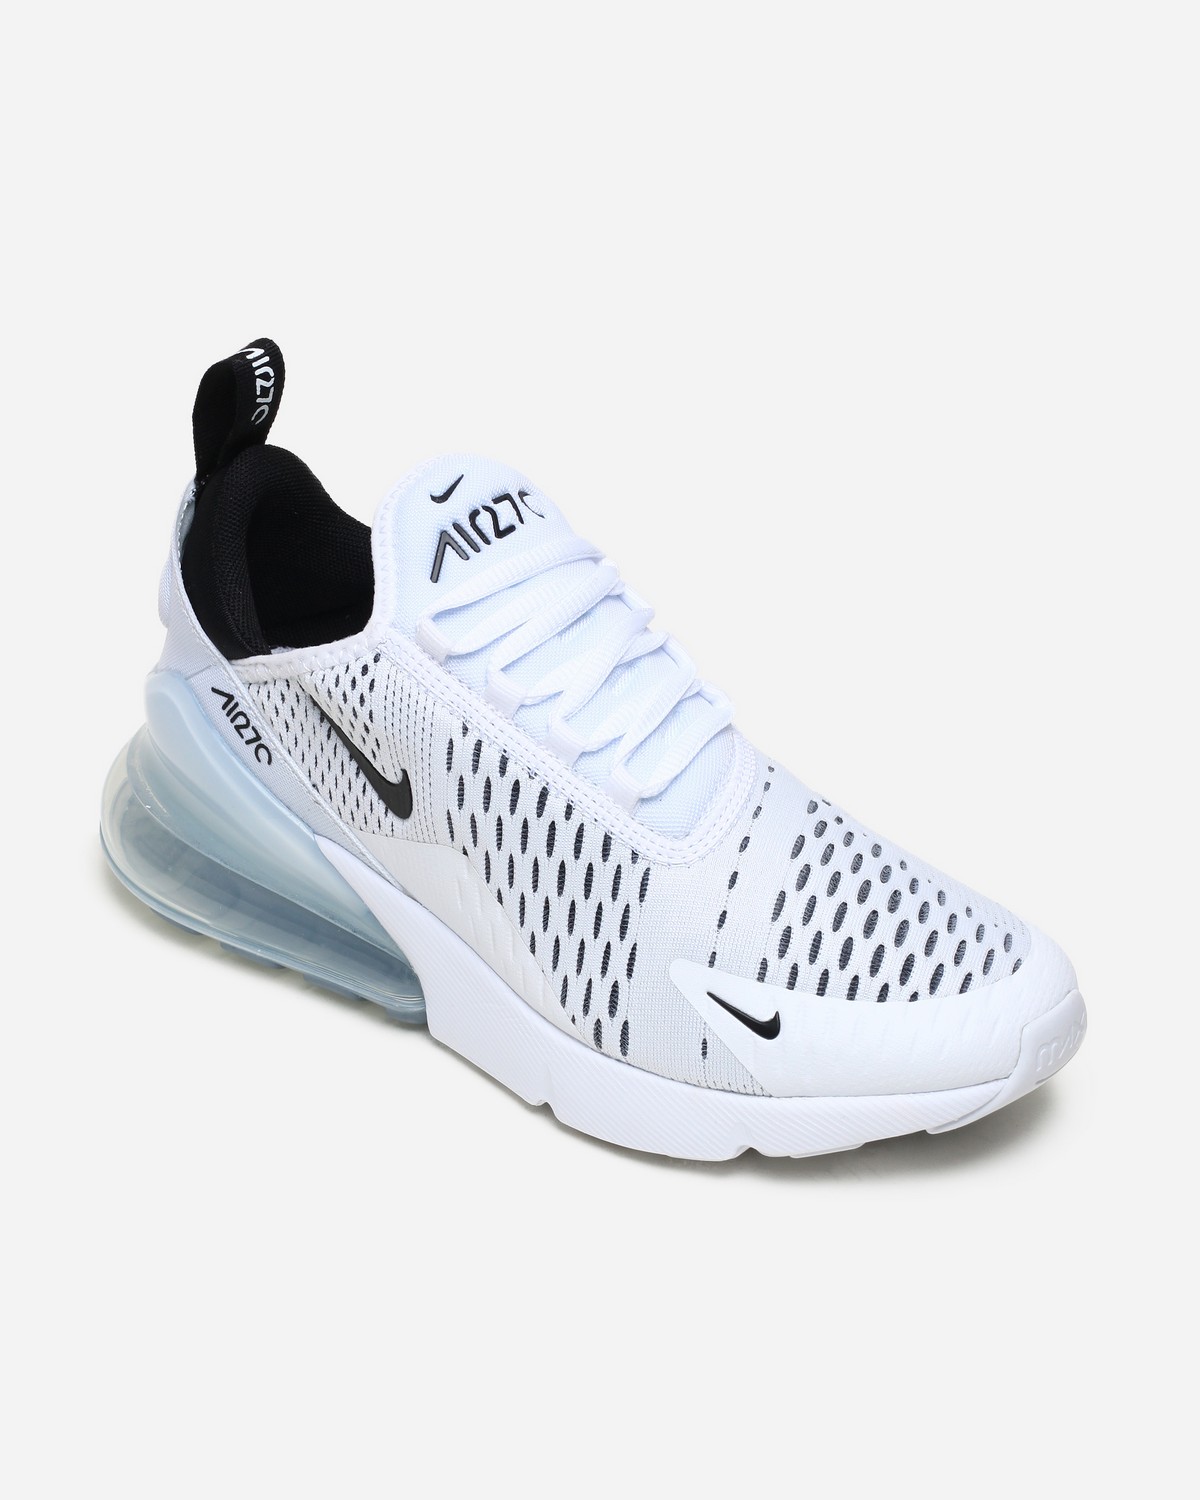 Nike Shows Icy White Air Max 270 For Women